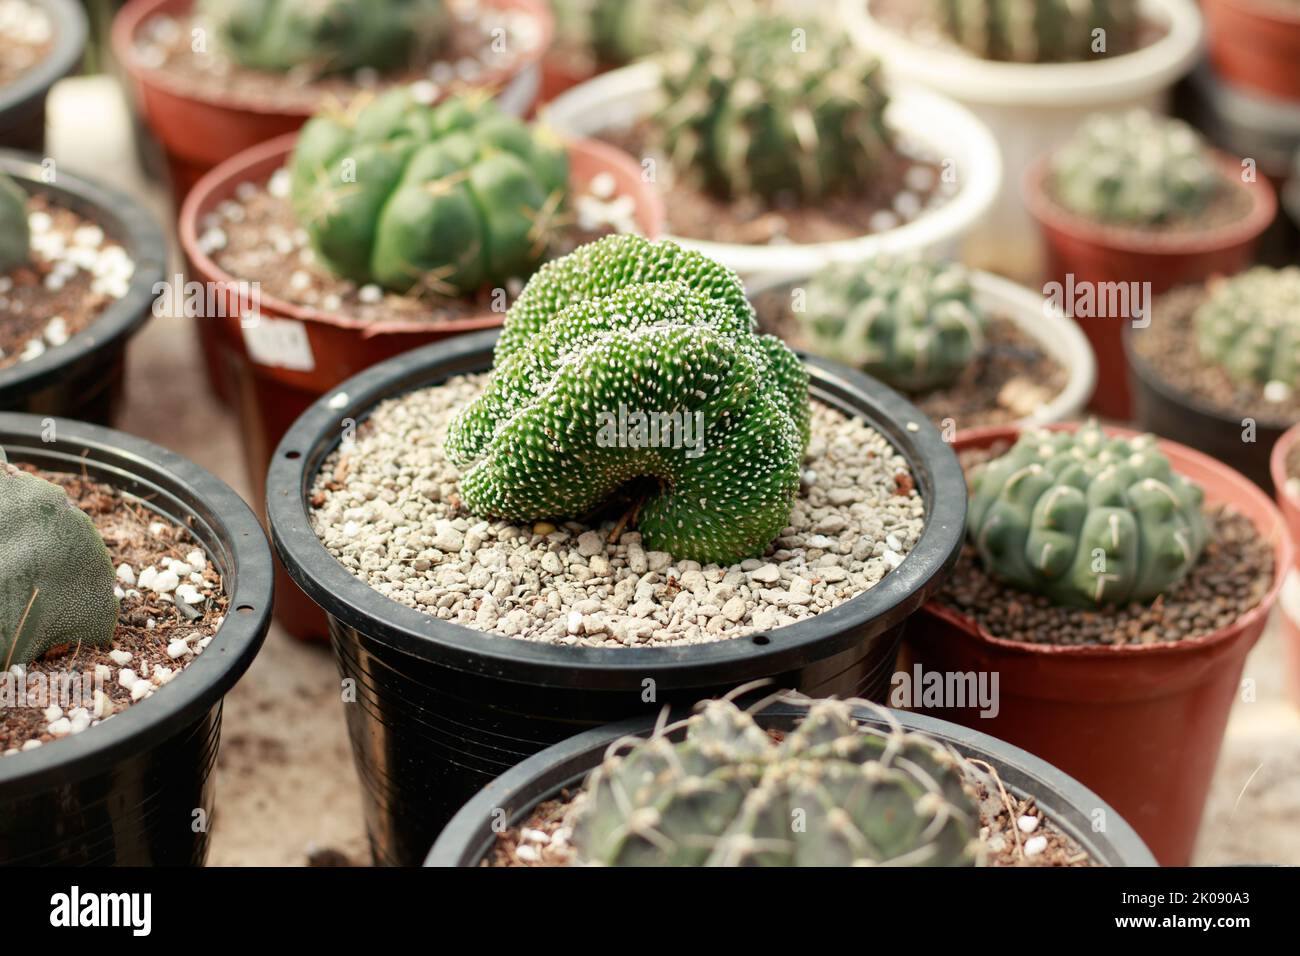 A rare cactus called Bolivicereus Cristata among other cactus species displayed at a plant shop Stock Photo